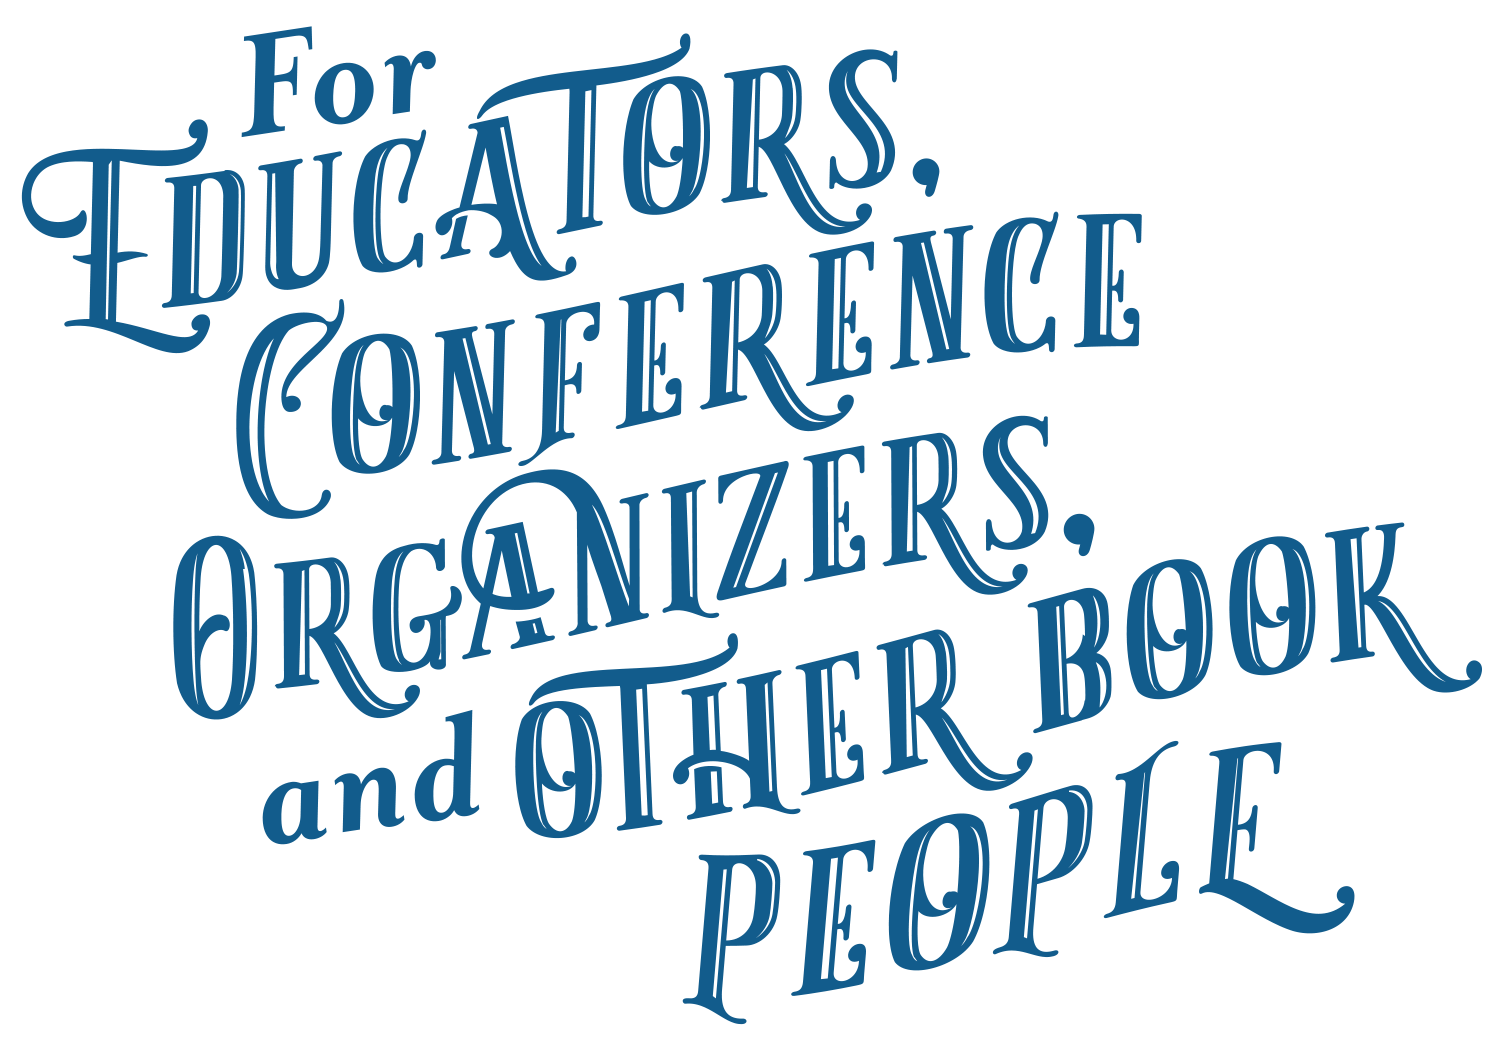 For Educators, Conference Organizers, and Other Book People